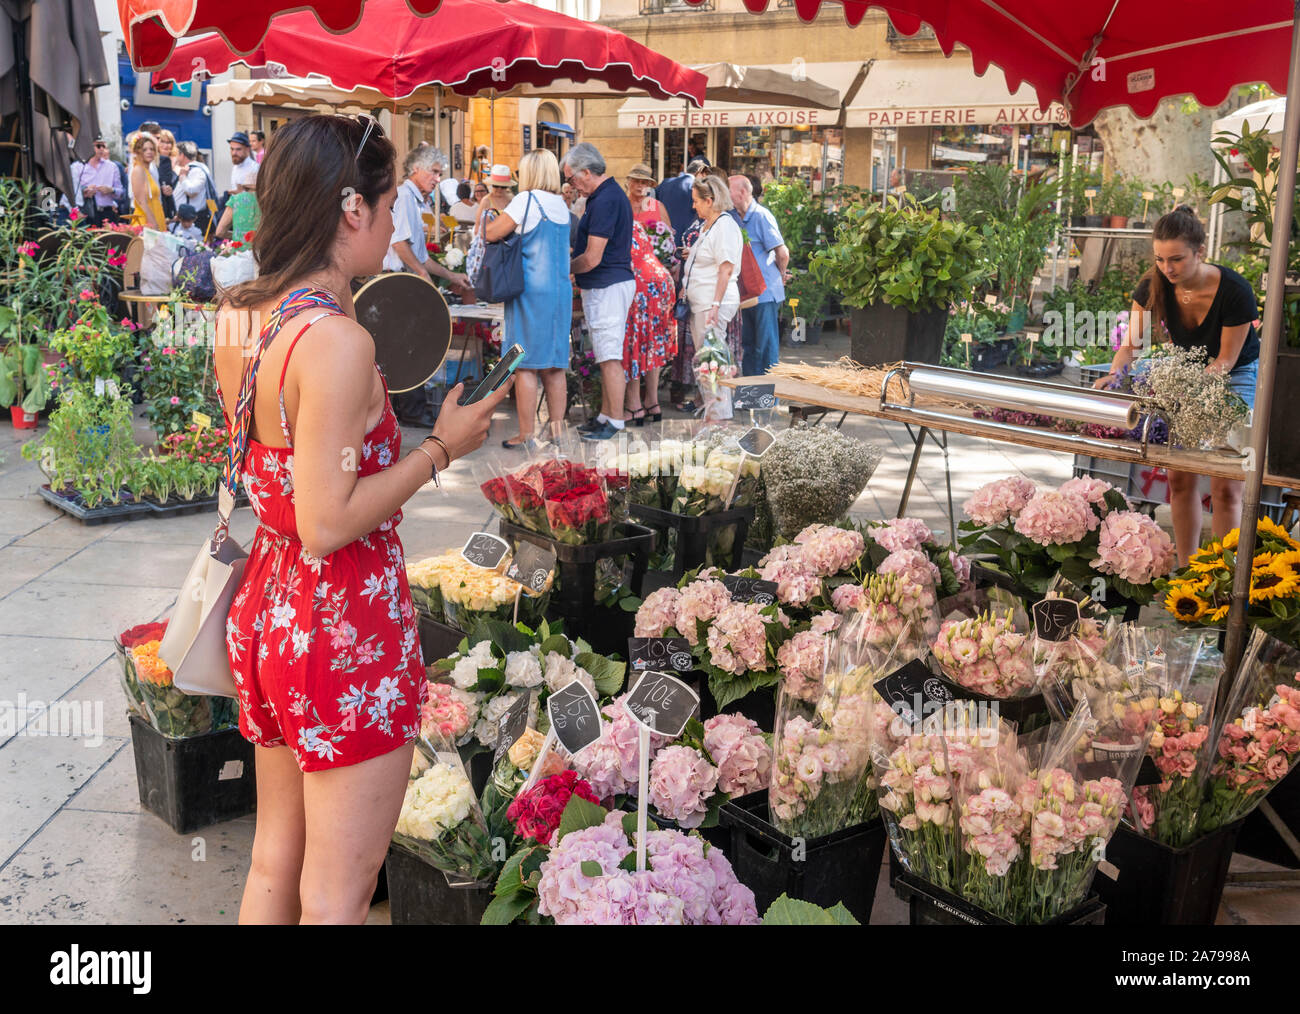 market stall with flowers, Aix en Provence, France Stock Photo